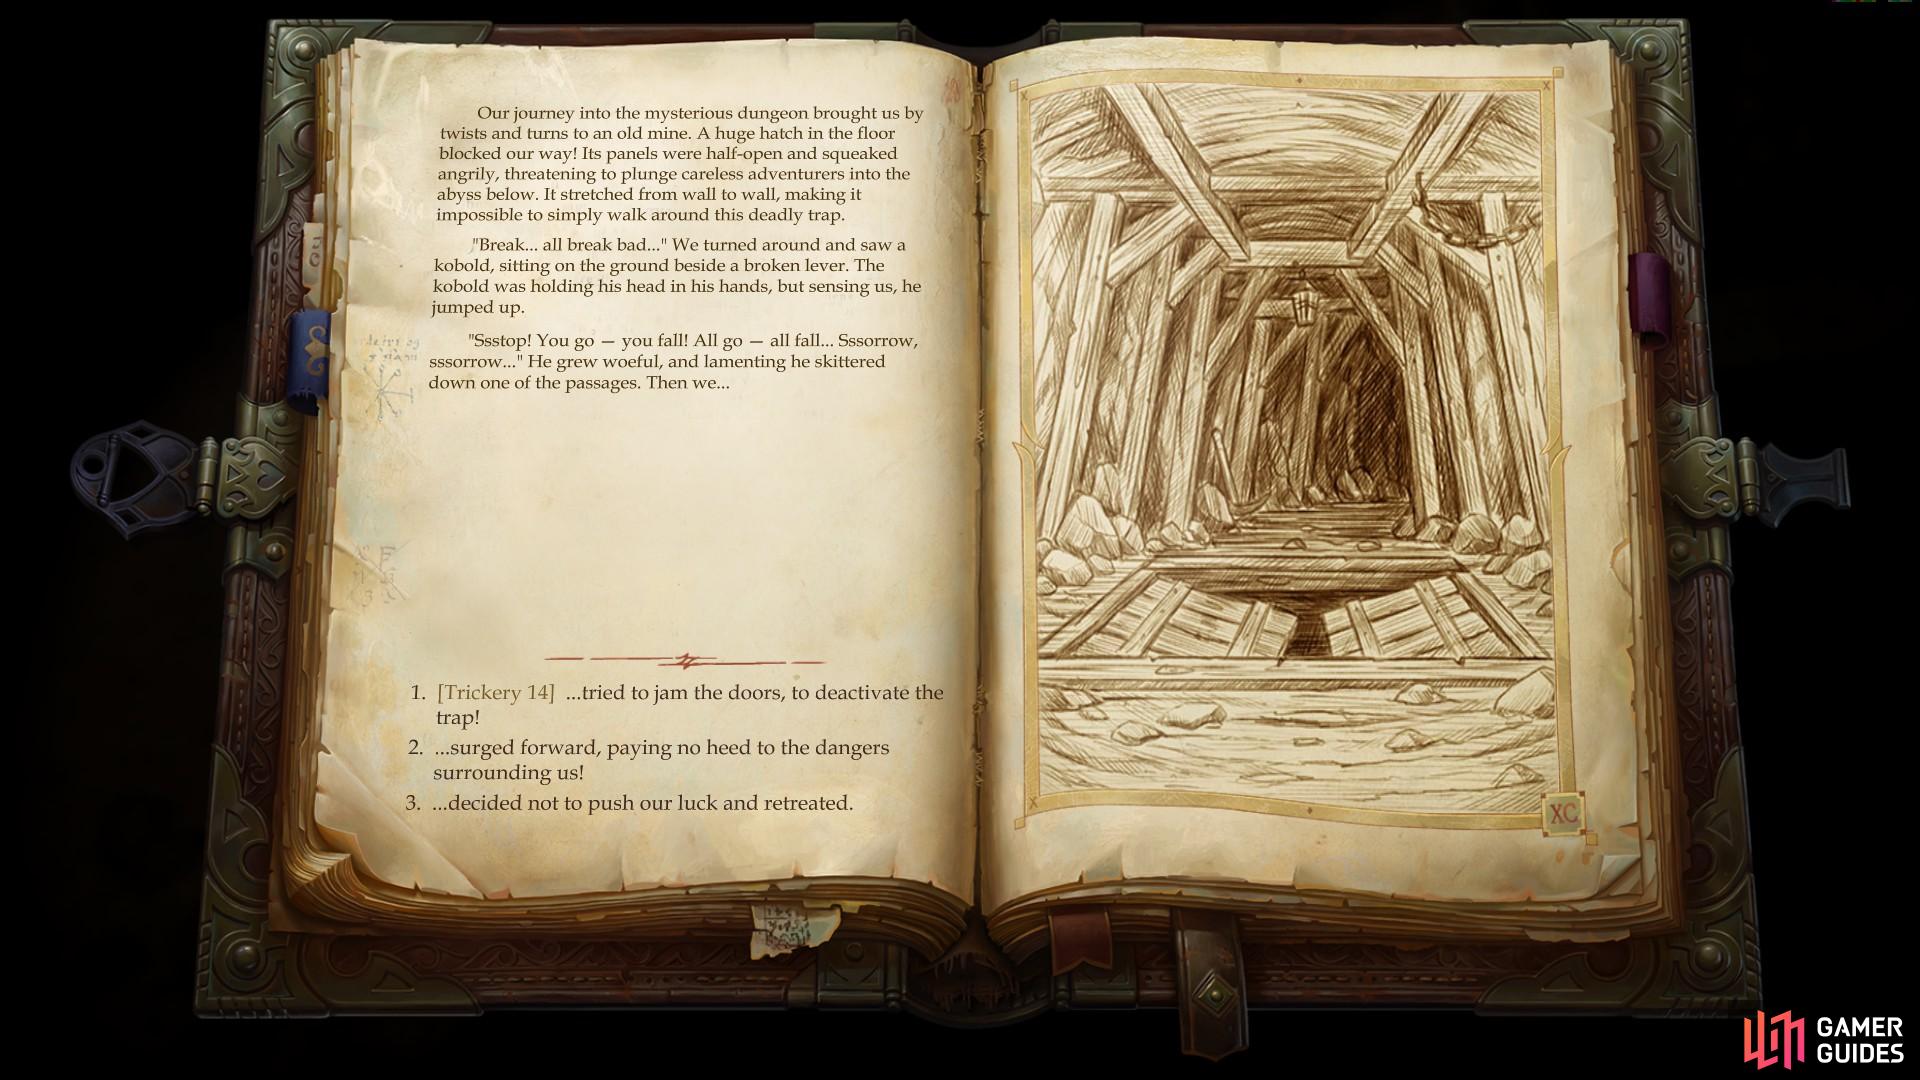 and beyond that you'll need to navigate a trapdoor via an Illustrated Book Episode.